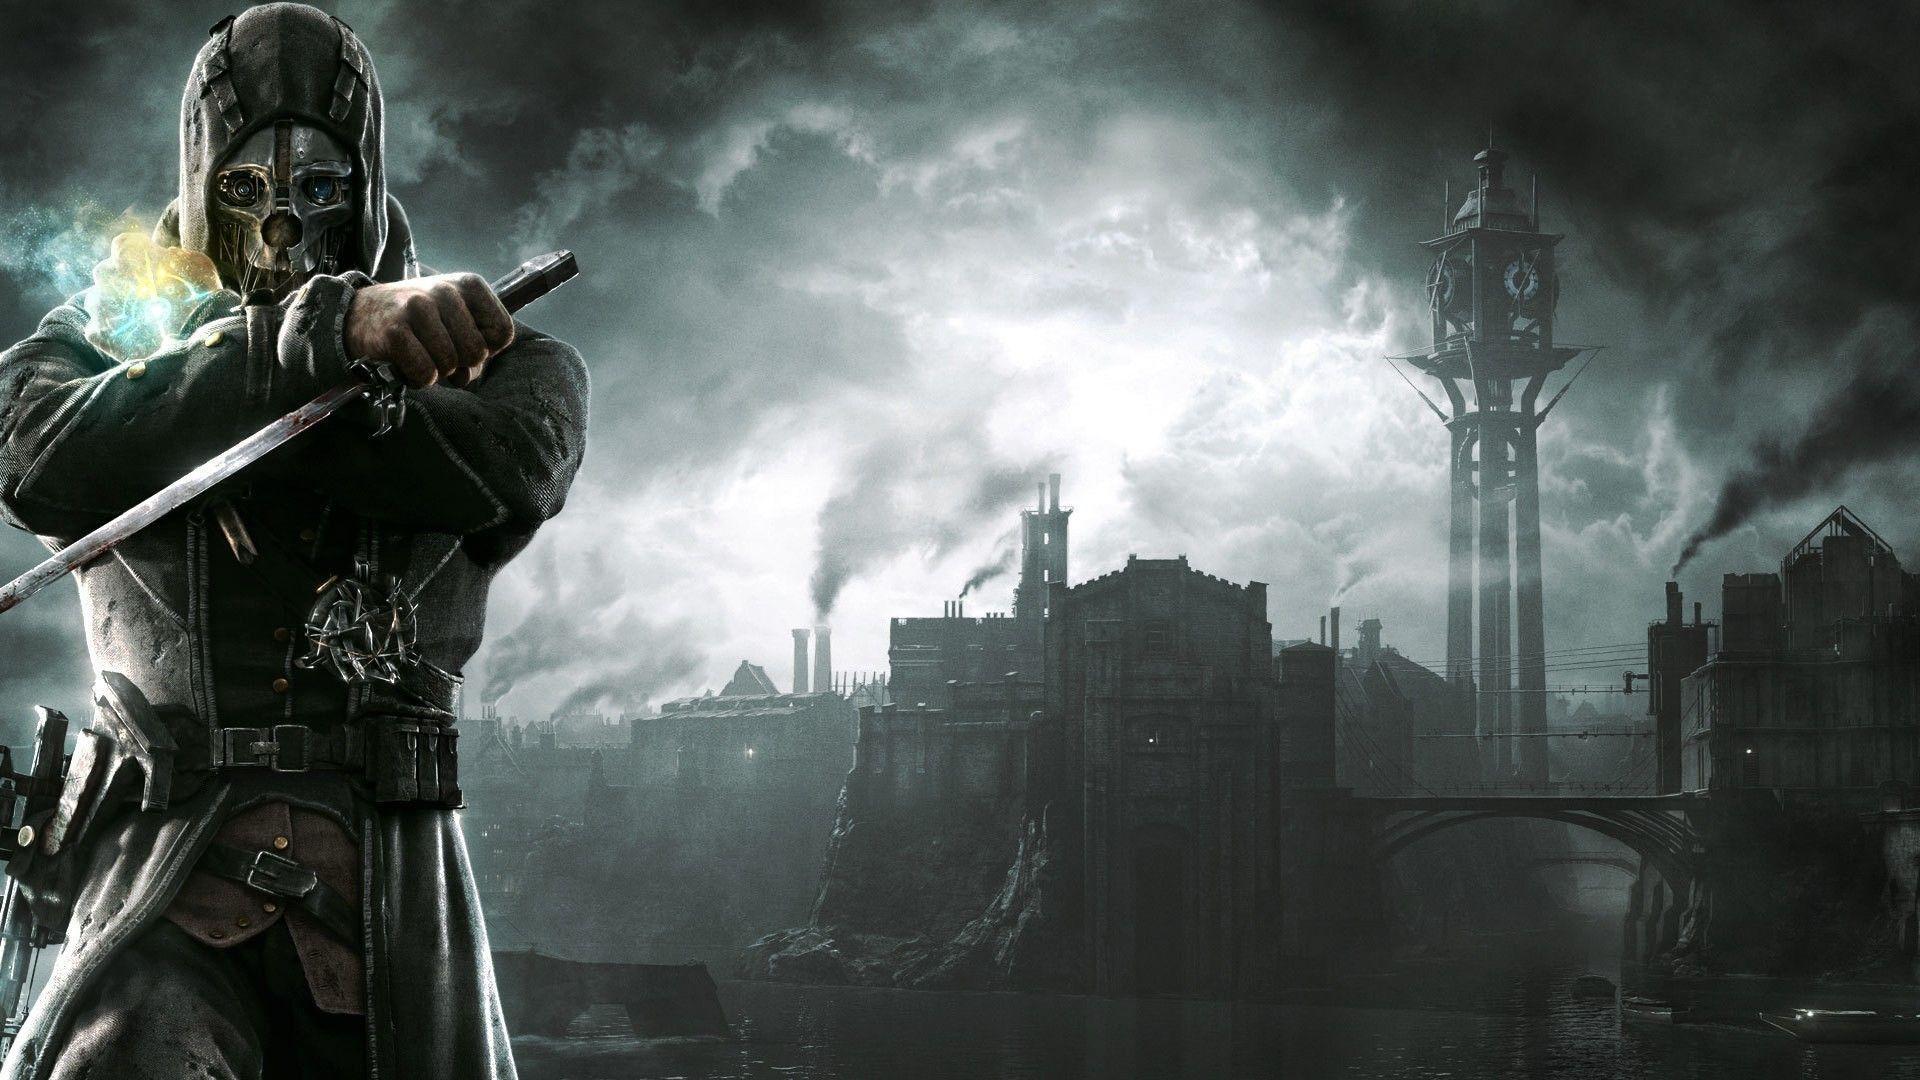 Dishonored Wallpaper for PC. Full HD Picture